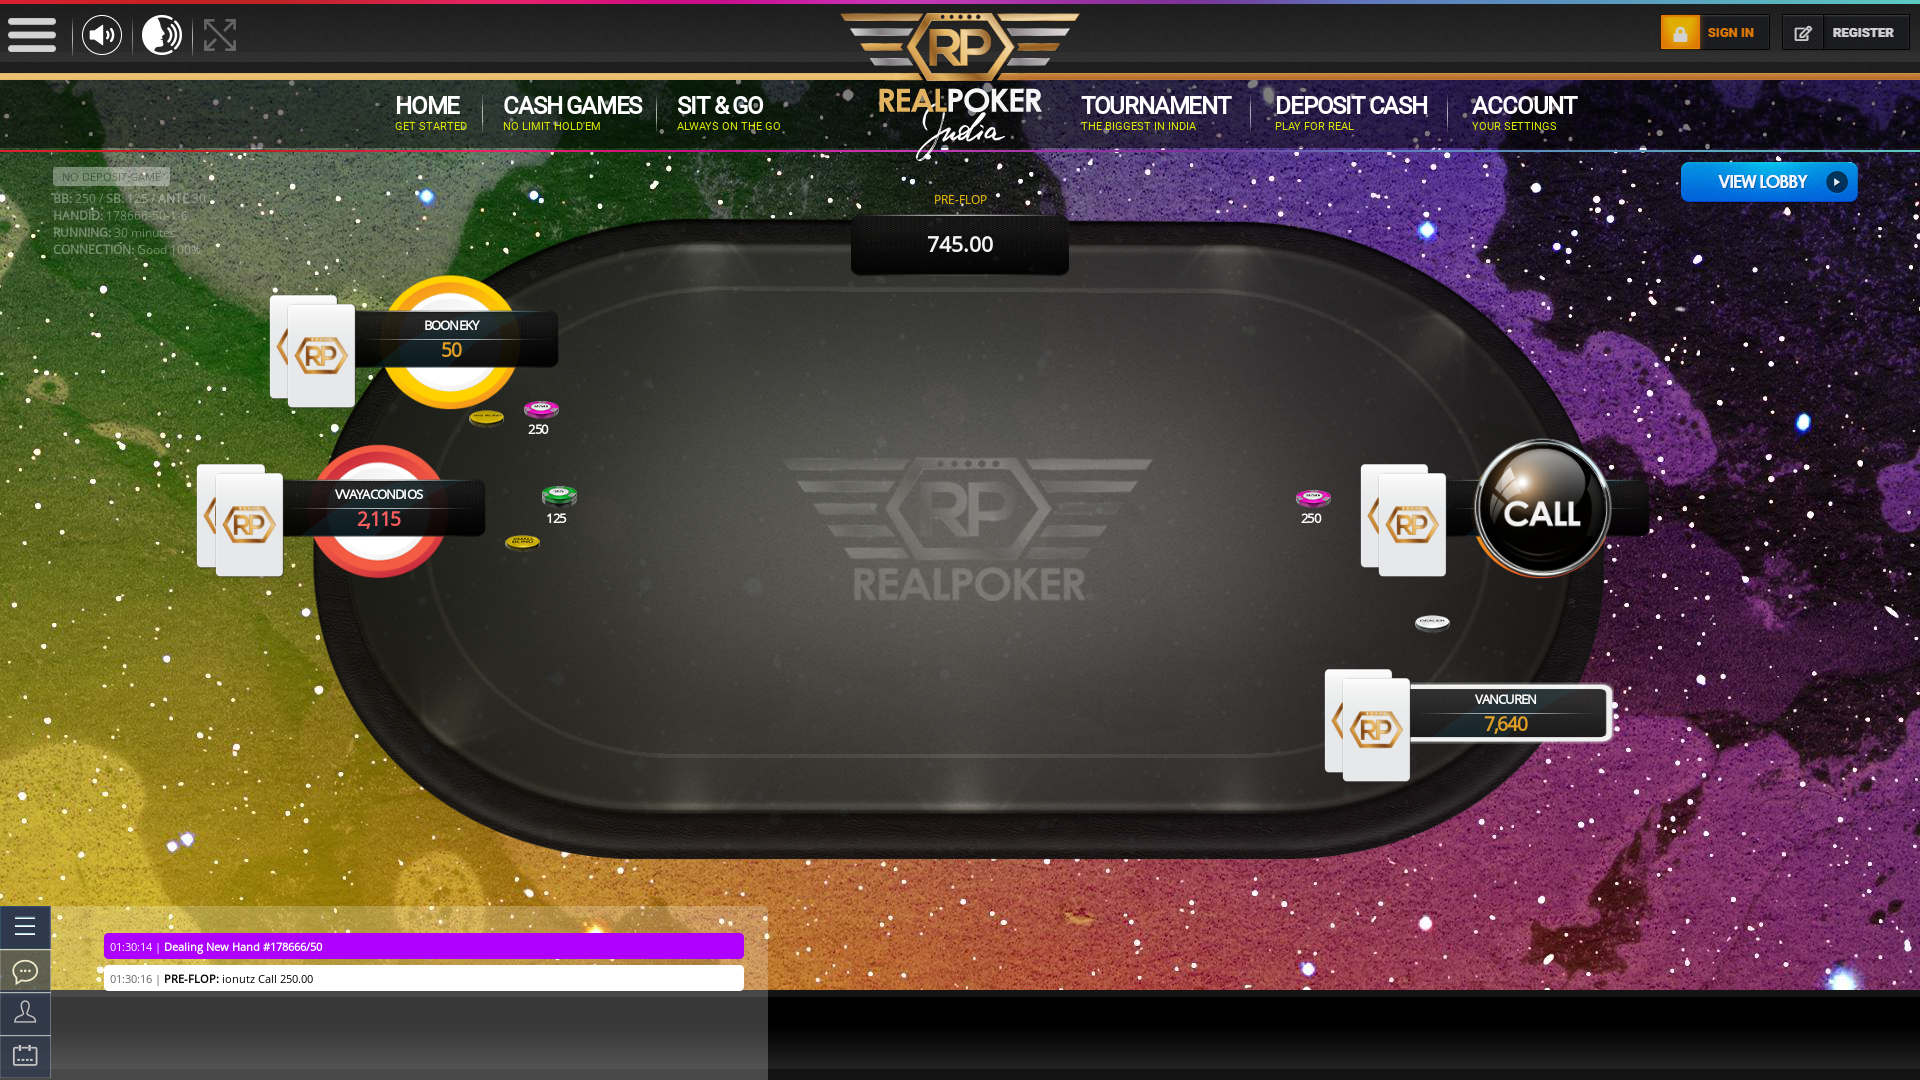 Santa Cruz, Mumbai online poker game on a 10 player table in the 30th minute